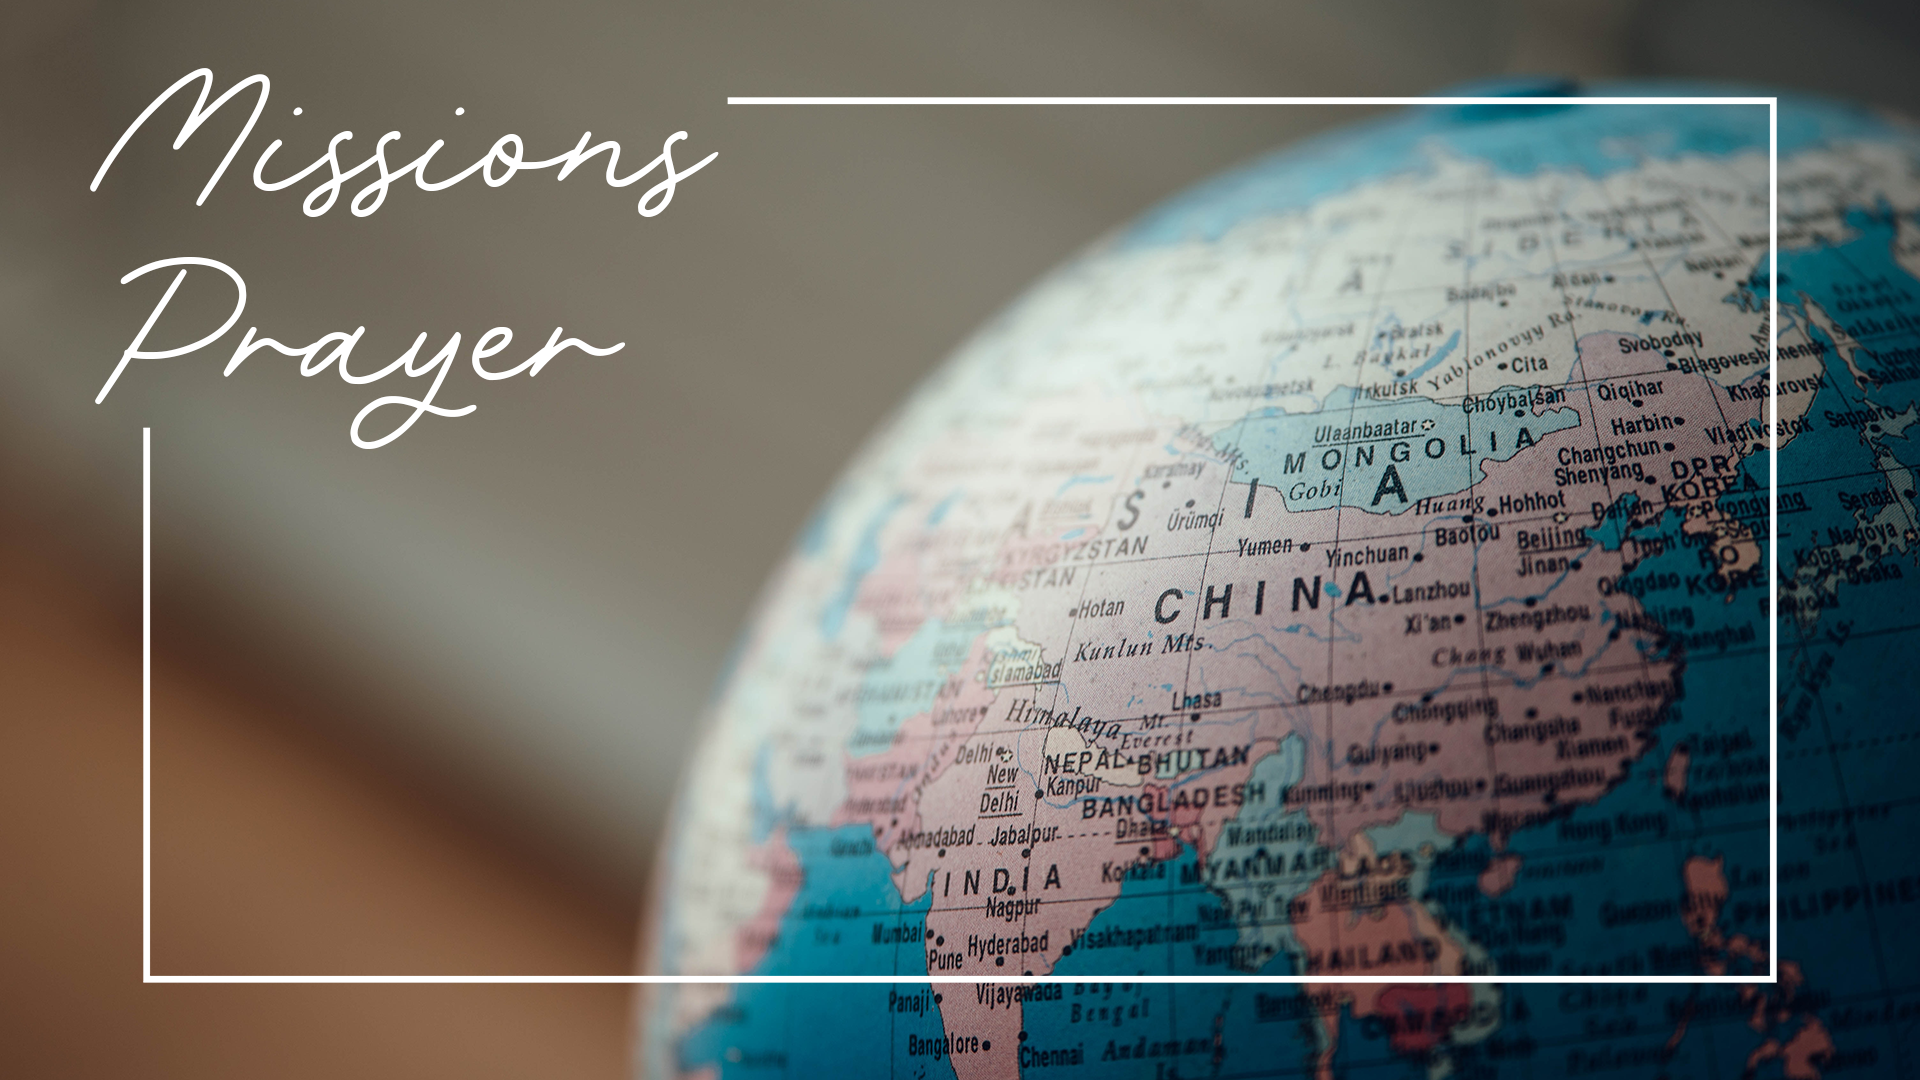 Missions Prayer During Fellowship Hour